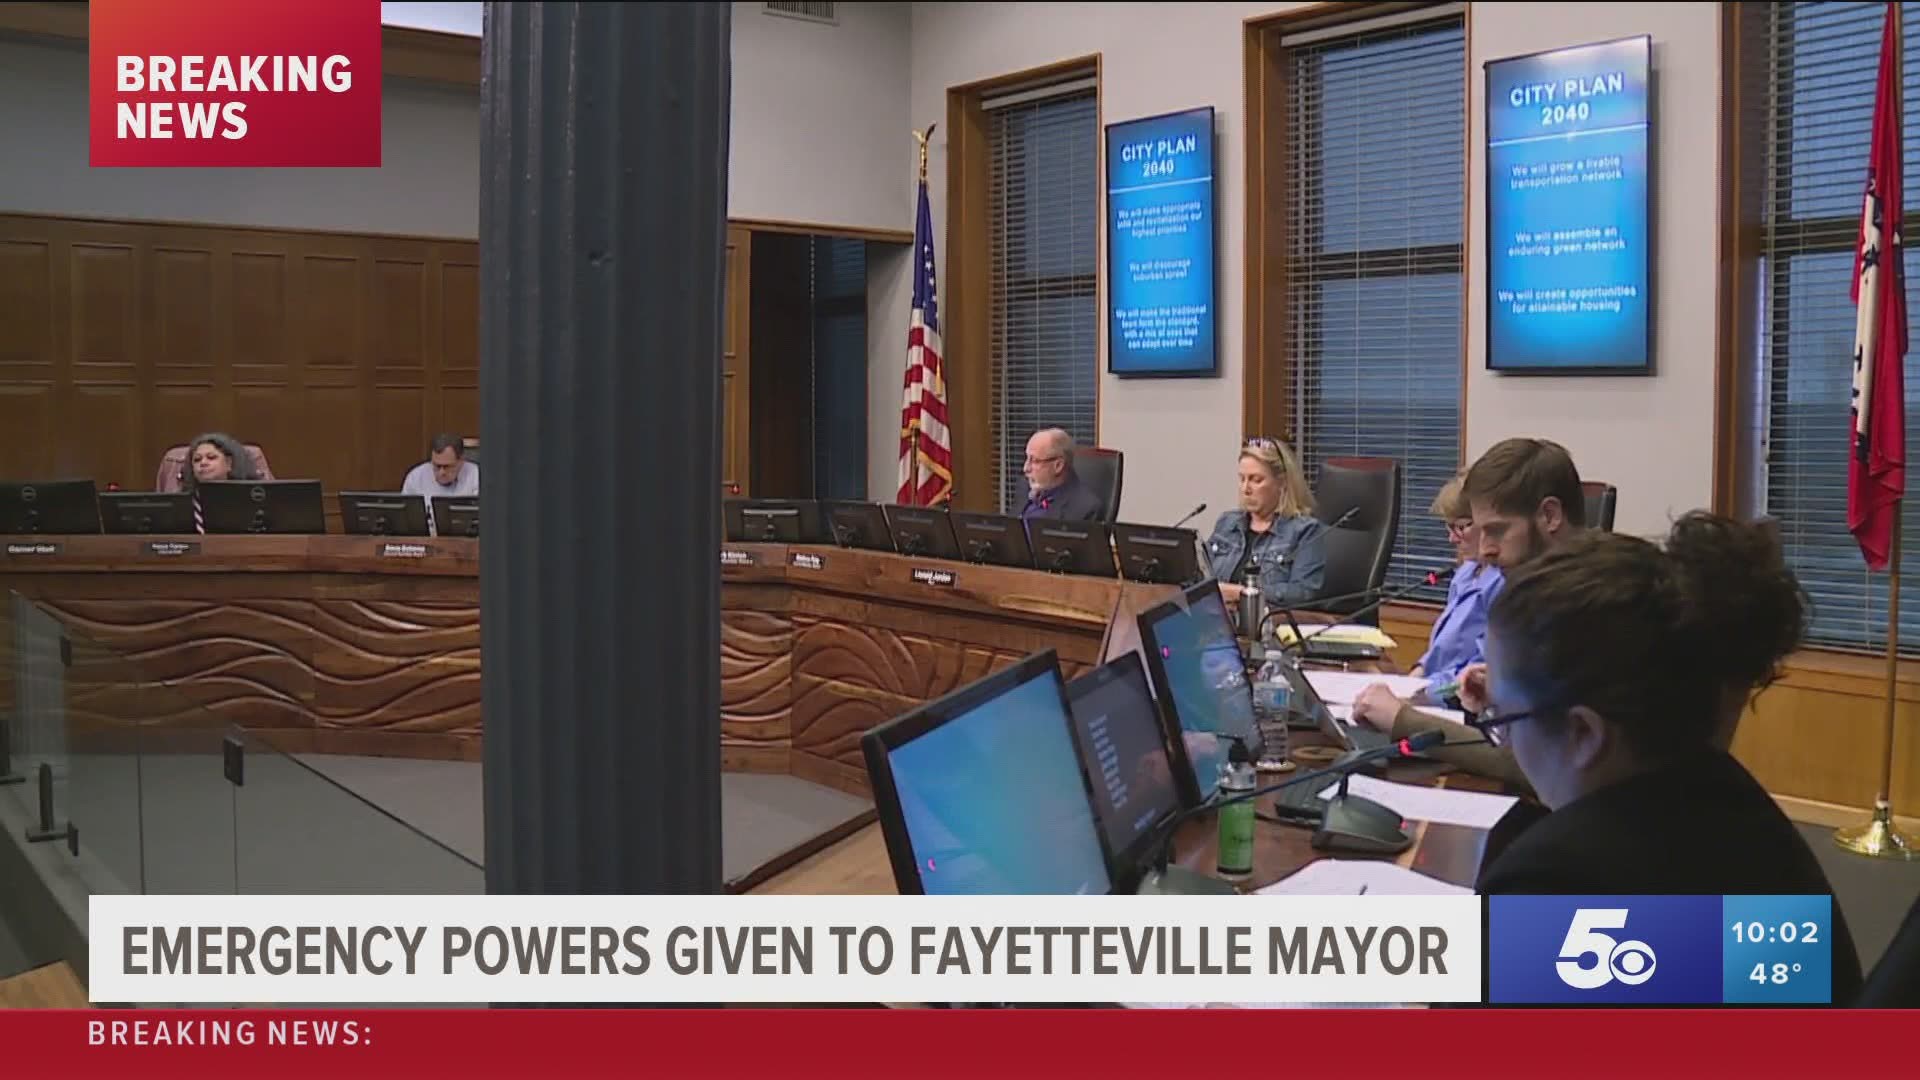 Emergency powers given to Fayetteville Mayor